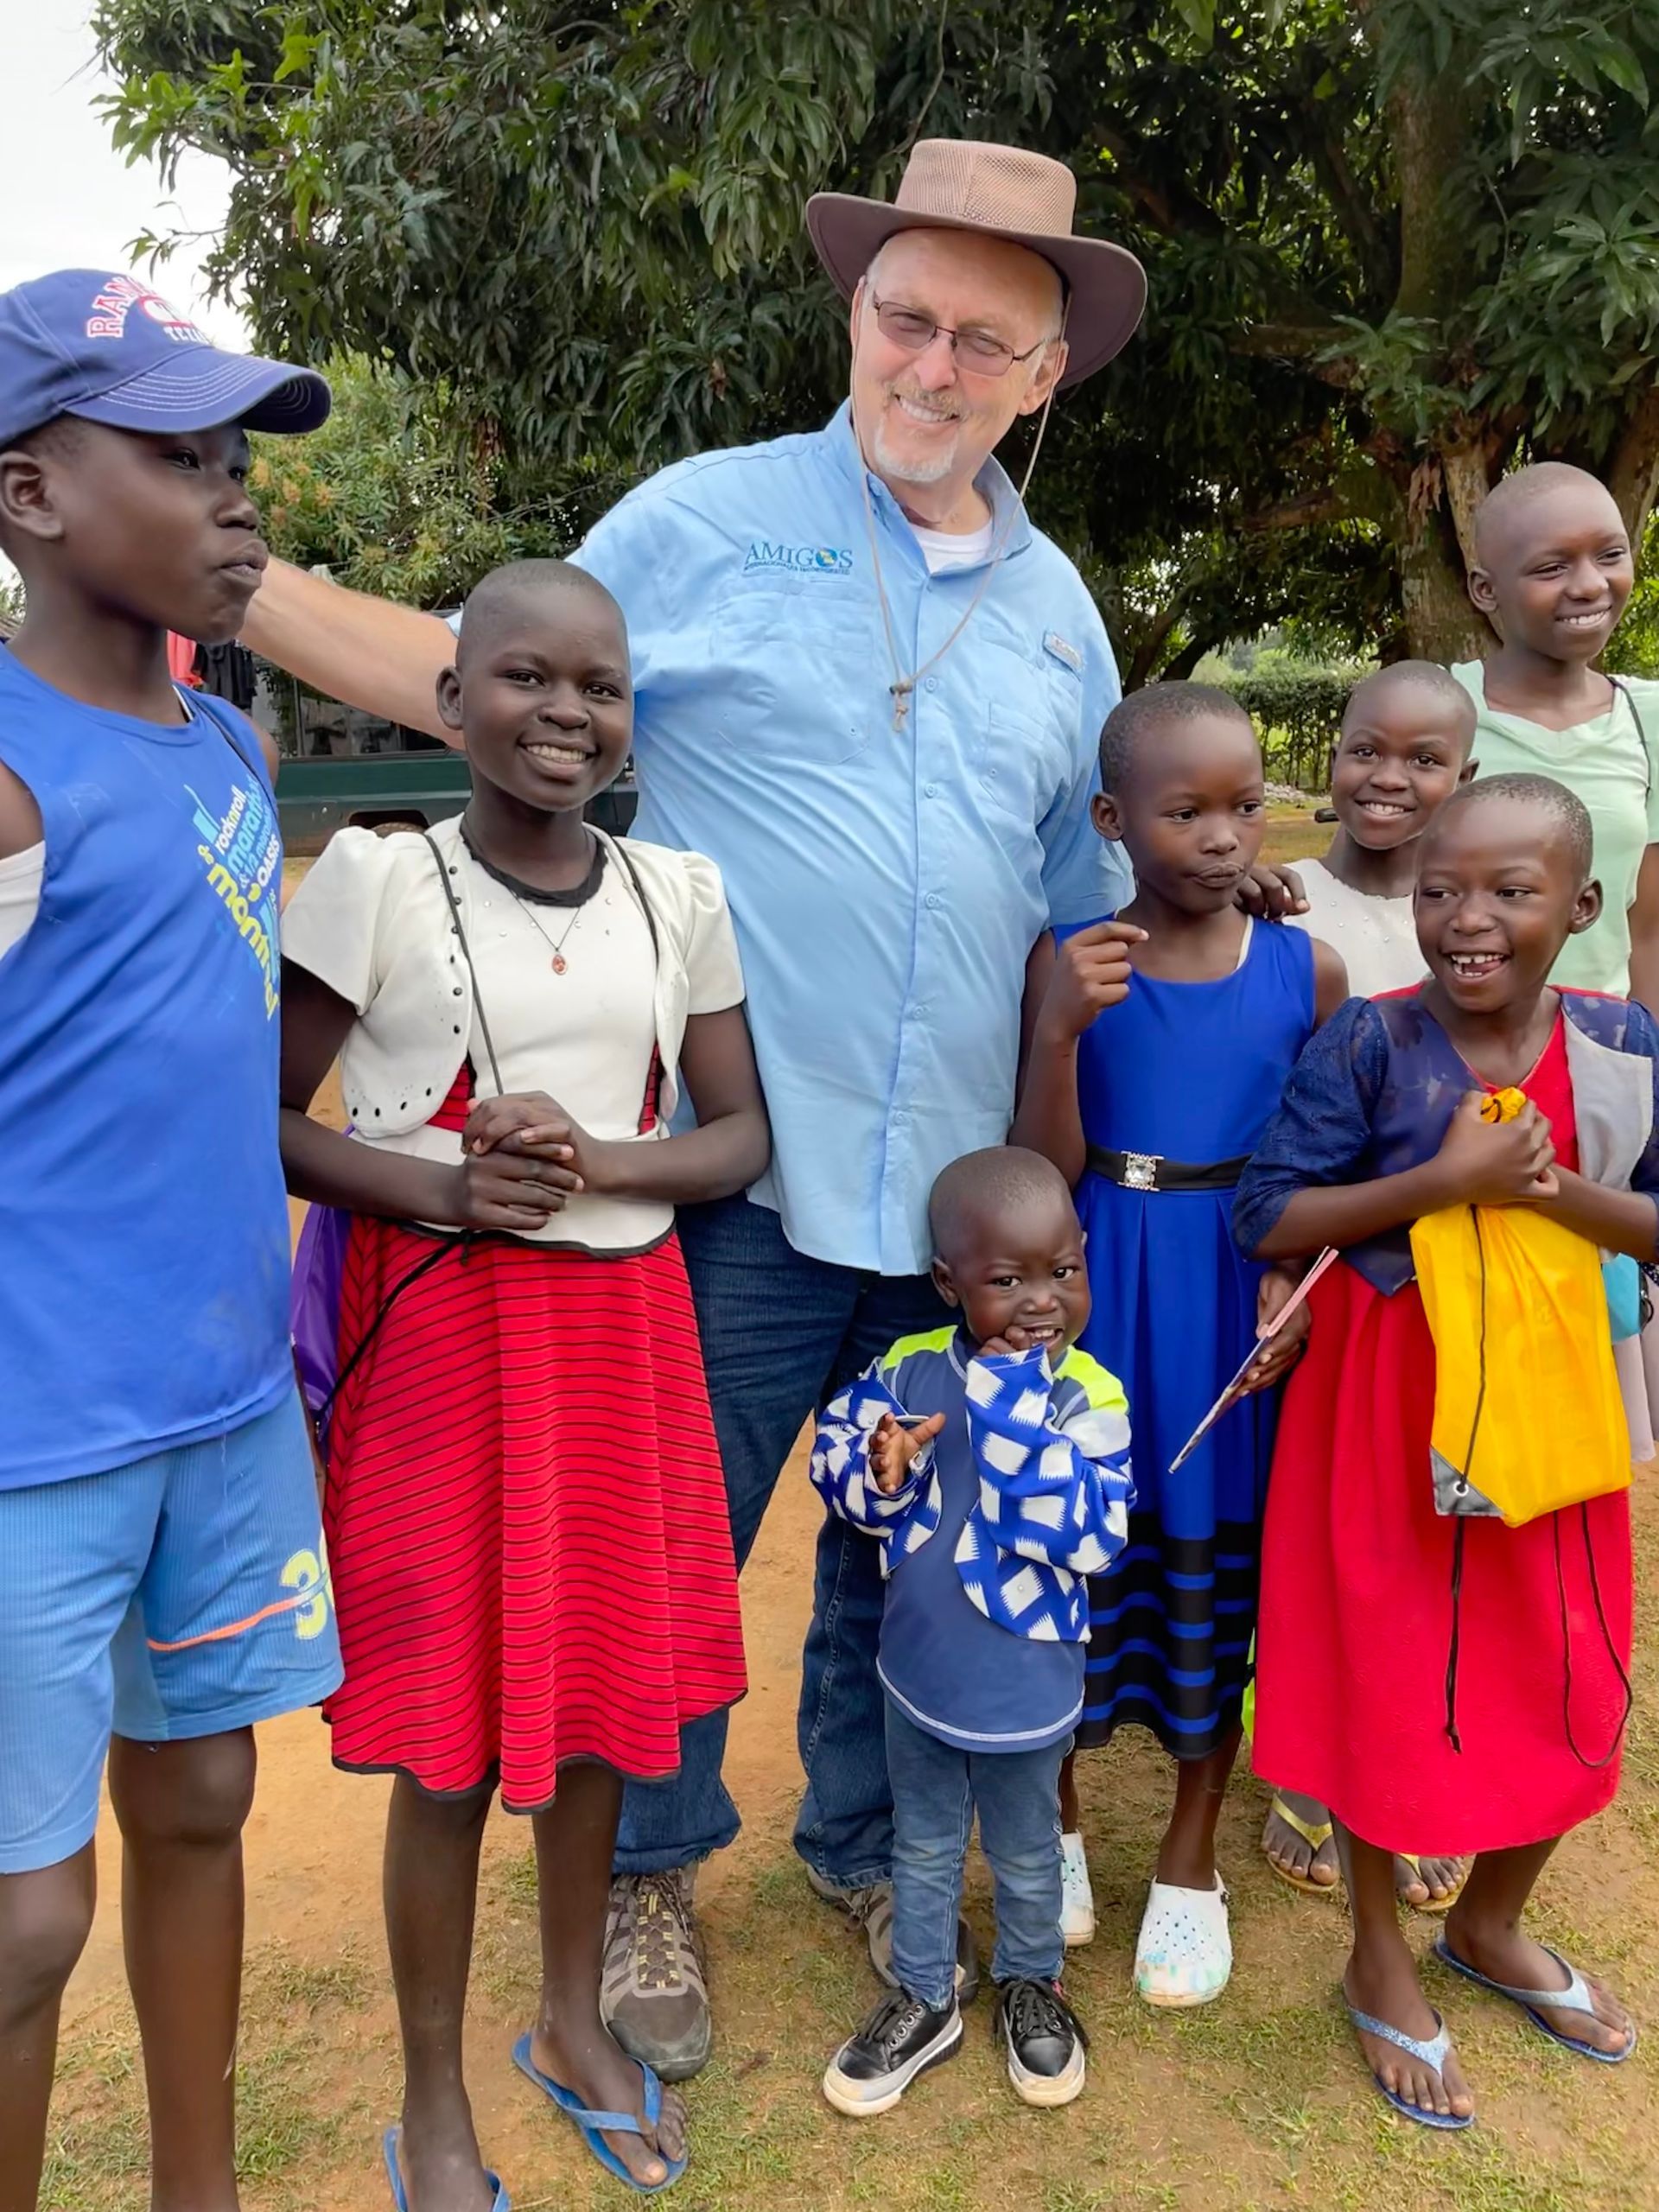 CEO Michael Ryer visiting with children from poverty enrolled in their Child Sponsorship program